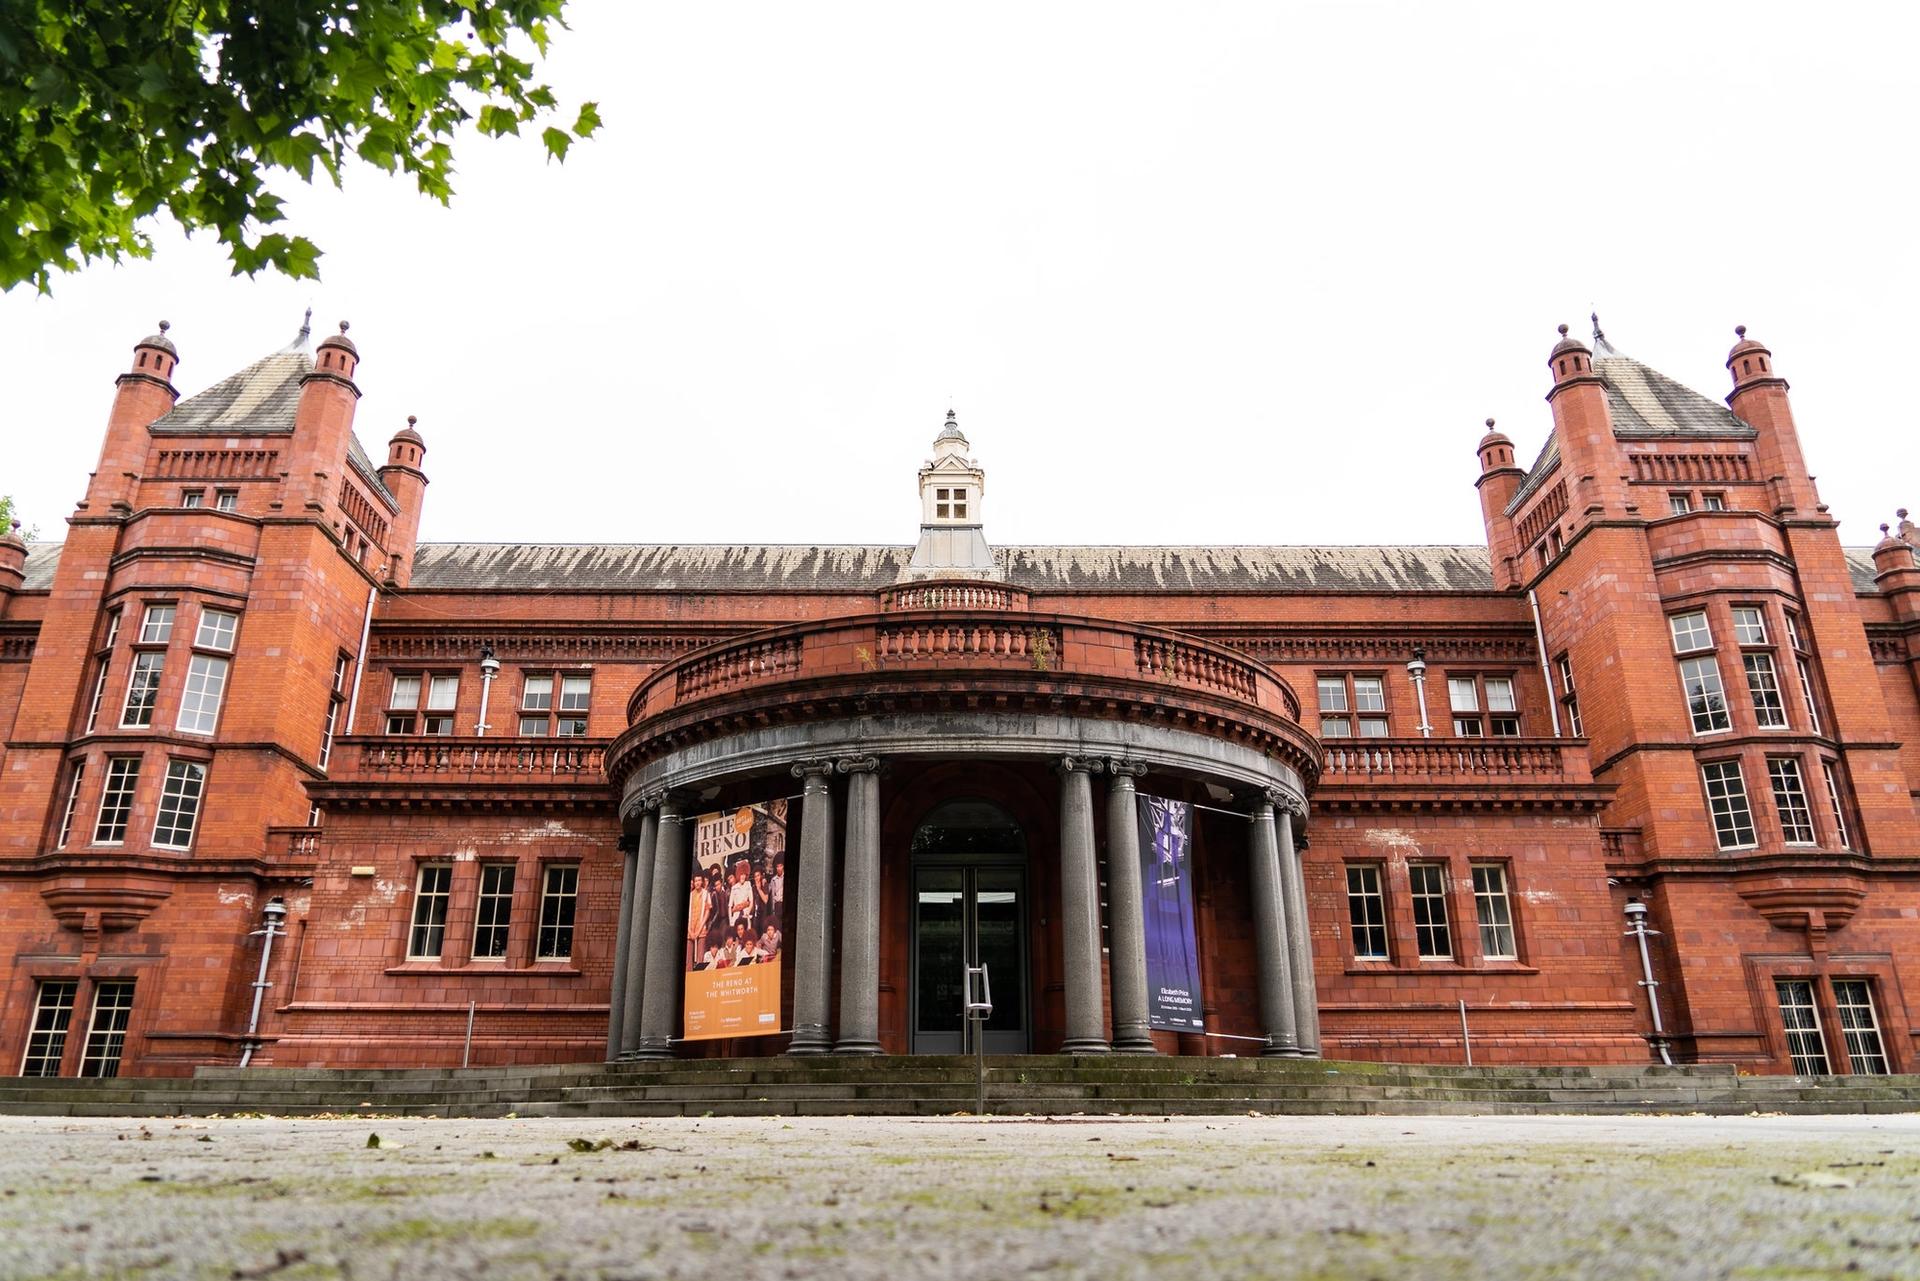 The Whitworth Art Gallery in Manchester Photo: City Suites/Flickr